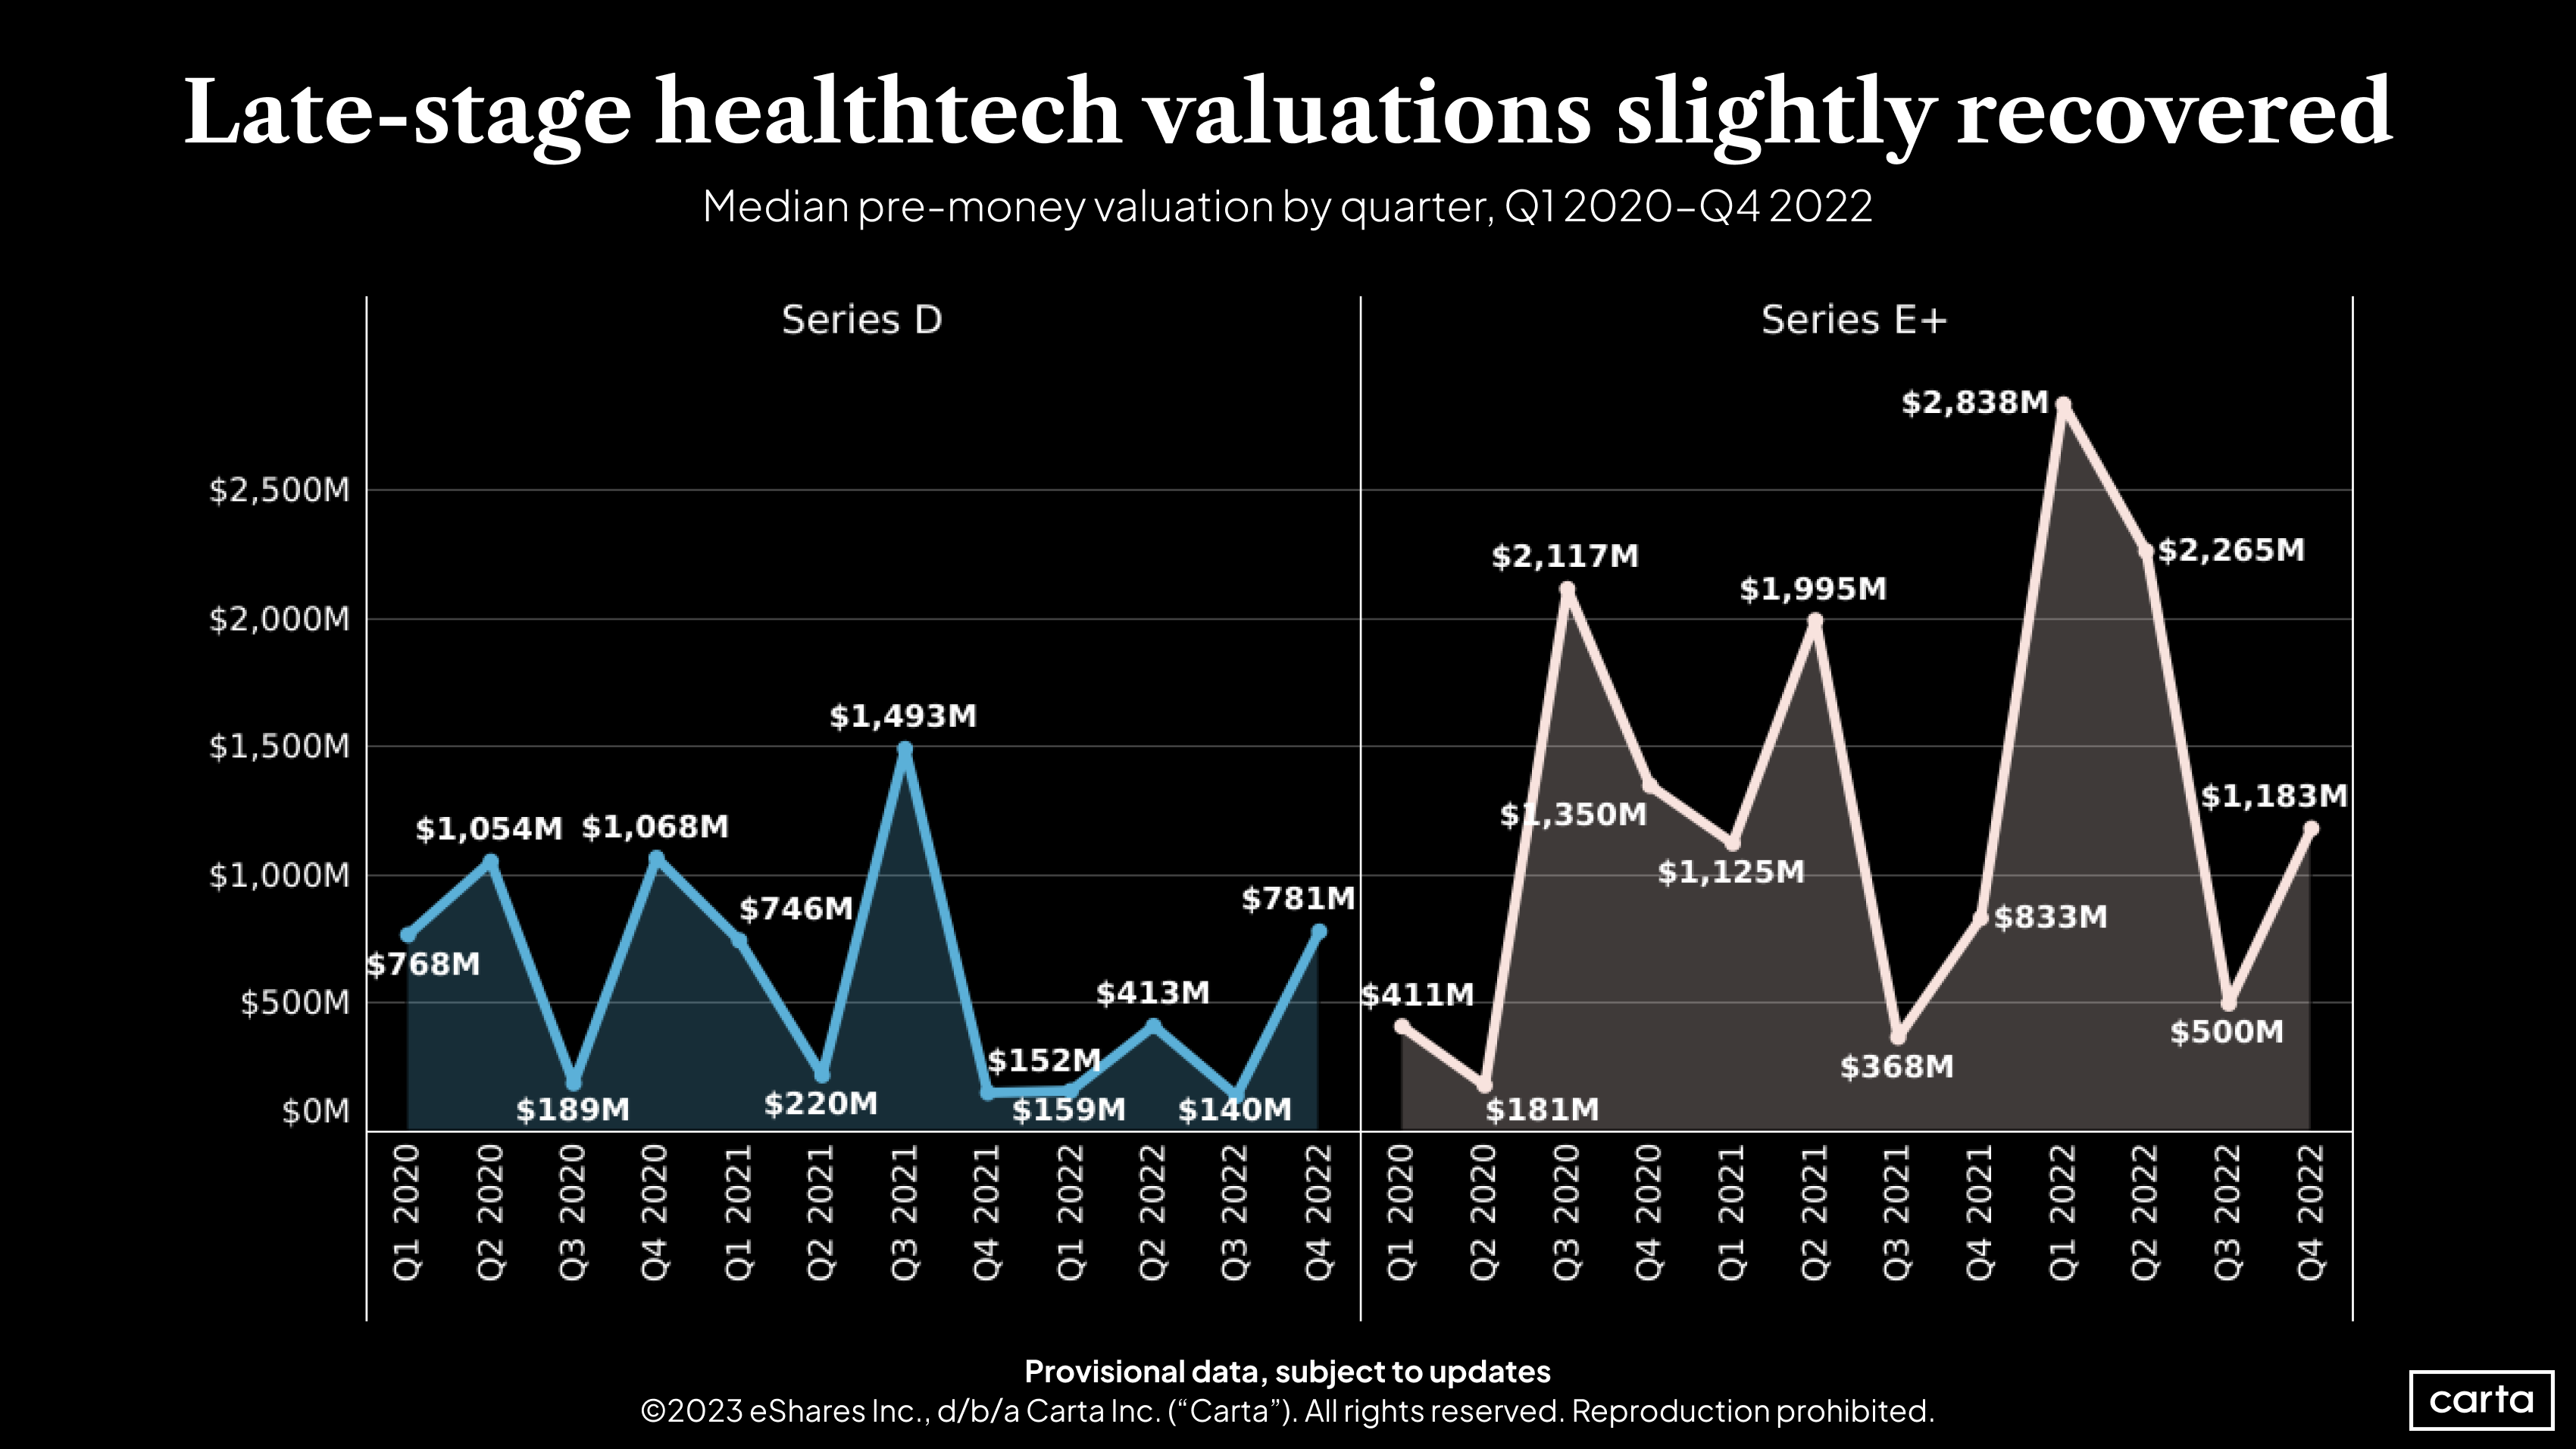 Median pre-money valuation by quarter for healthtech companies at Series D and E+, Q1 2020-Q4 2022